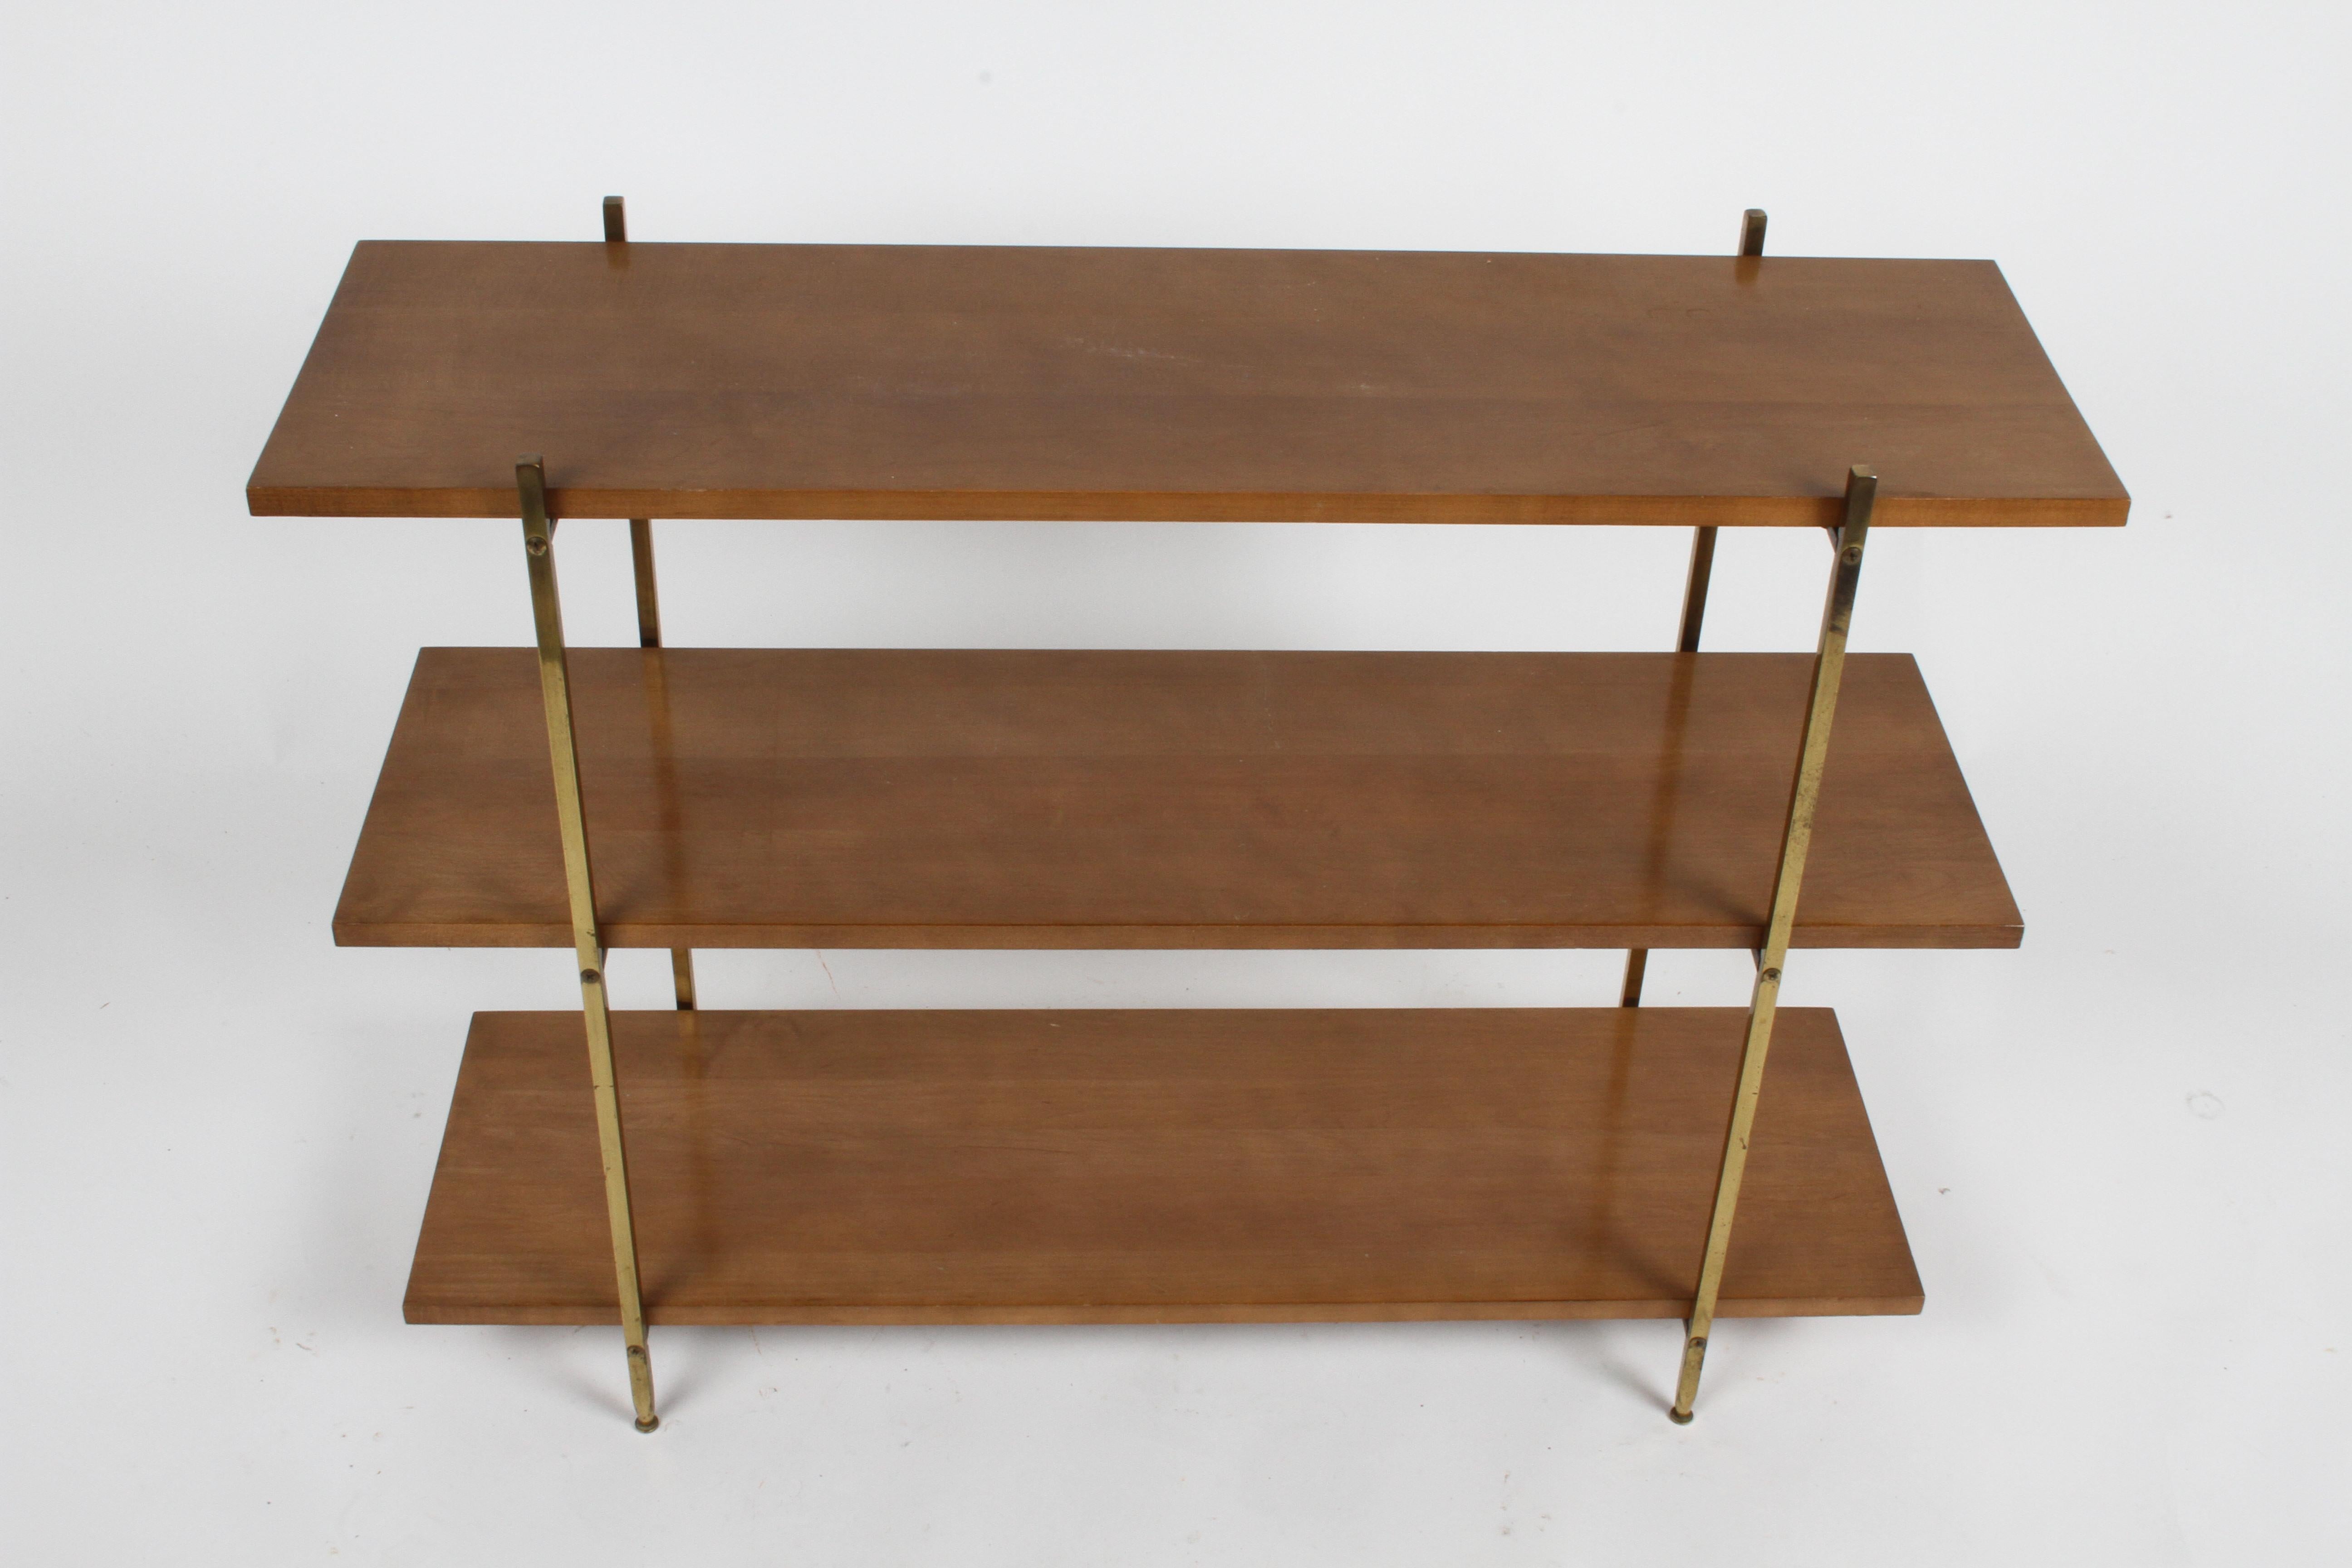 Attributed to Paul McCobb, this quality and heavy Mid-Century Modern three tier bookshelf or TV stand has the characteristics of a McCobb design, with the square brass and use of maple for shelves. The 1/2 square solid brass tapers at the end of the